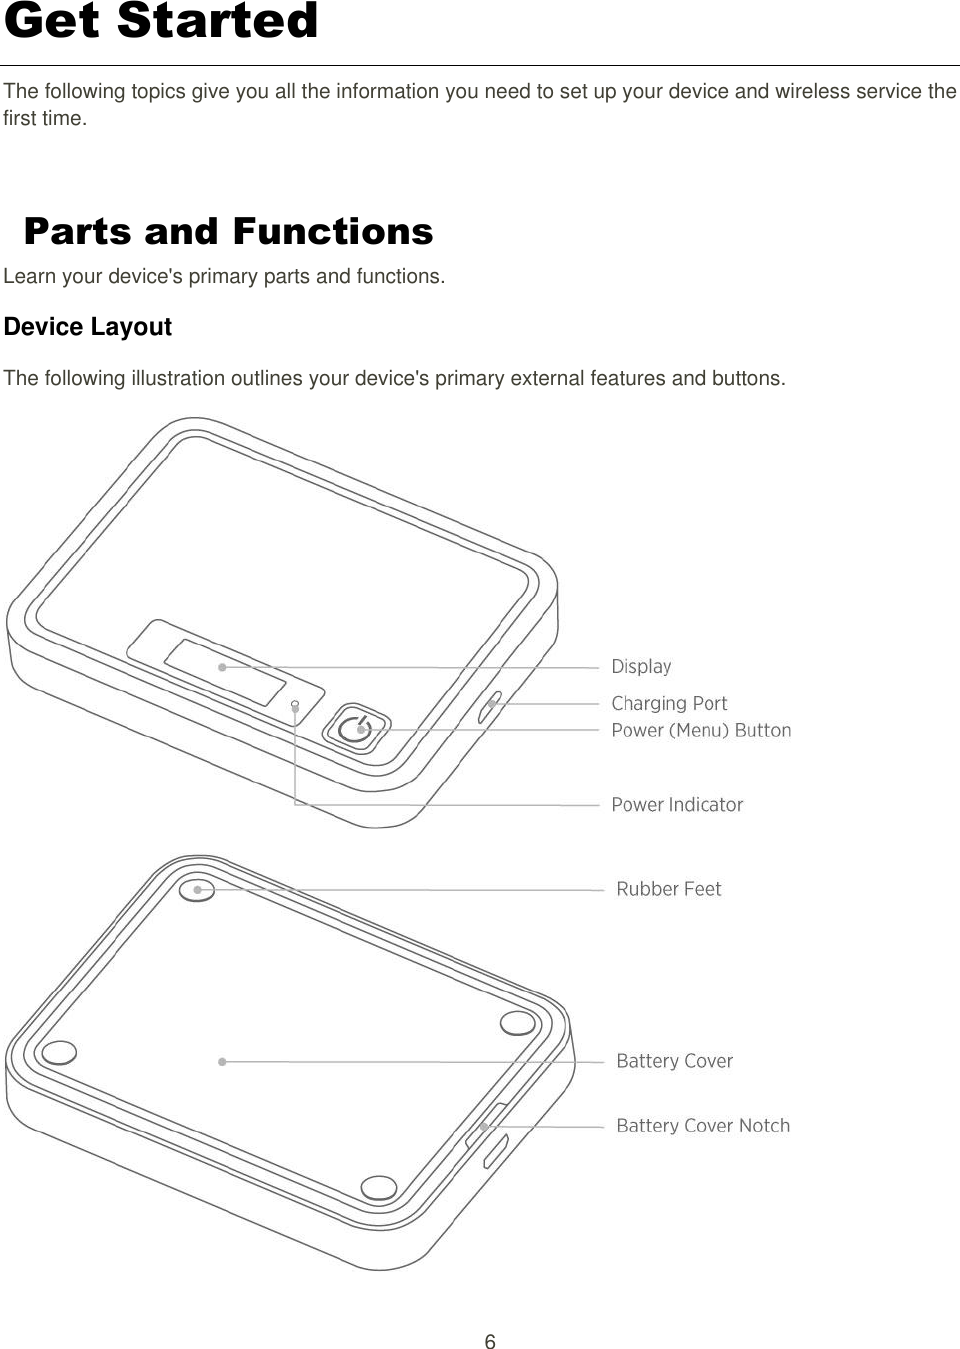 6  Get Started The following topics give you all the information you need to set up your device and wireless service the first time.  Parts and Functions Learn your device&apos;s primary parts and functions. Device Layout   The following illustration outlines your device&apos;s primary external features and buttons.   